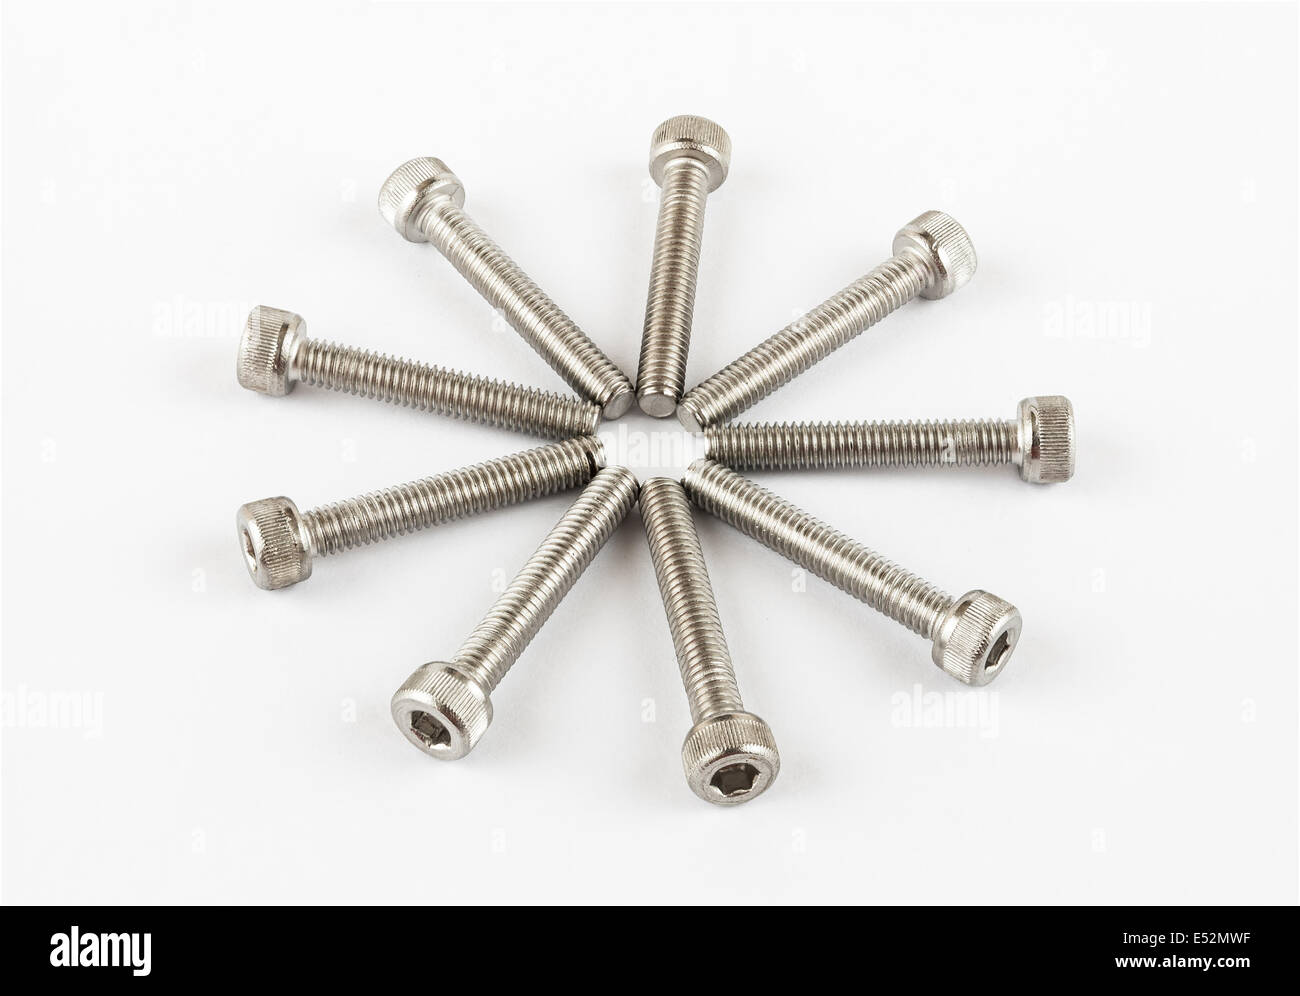 Round Pile of Stainless Steel Bolts. Stock Photo